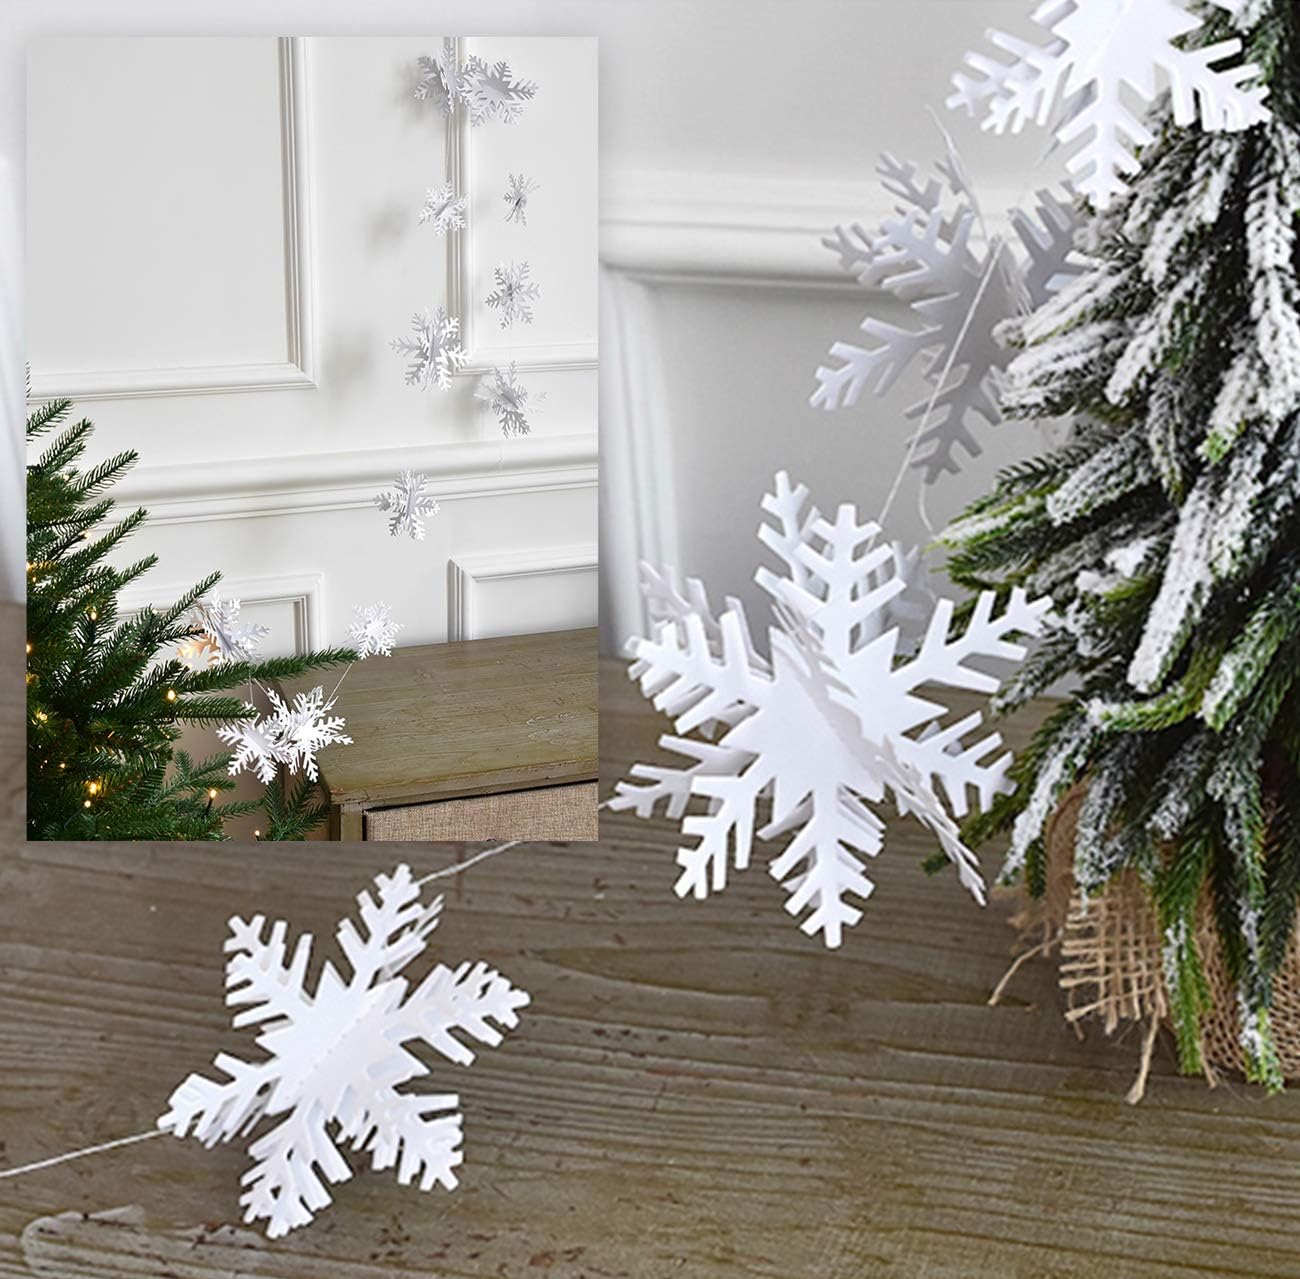 Winter Snowflake Hanging Decorations - 3D Large Silver Snowflakes Paper  Hanging Garland for Christmas Winter Wonderland Holiday New Year Party Home